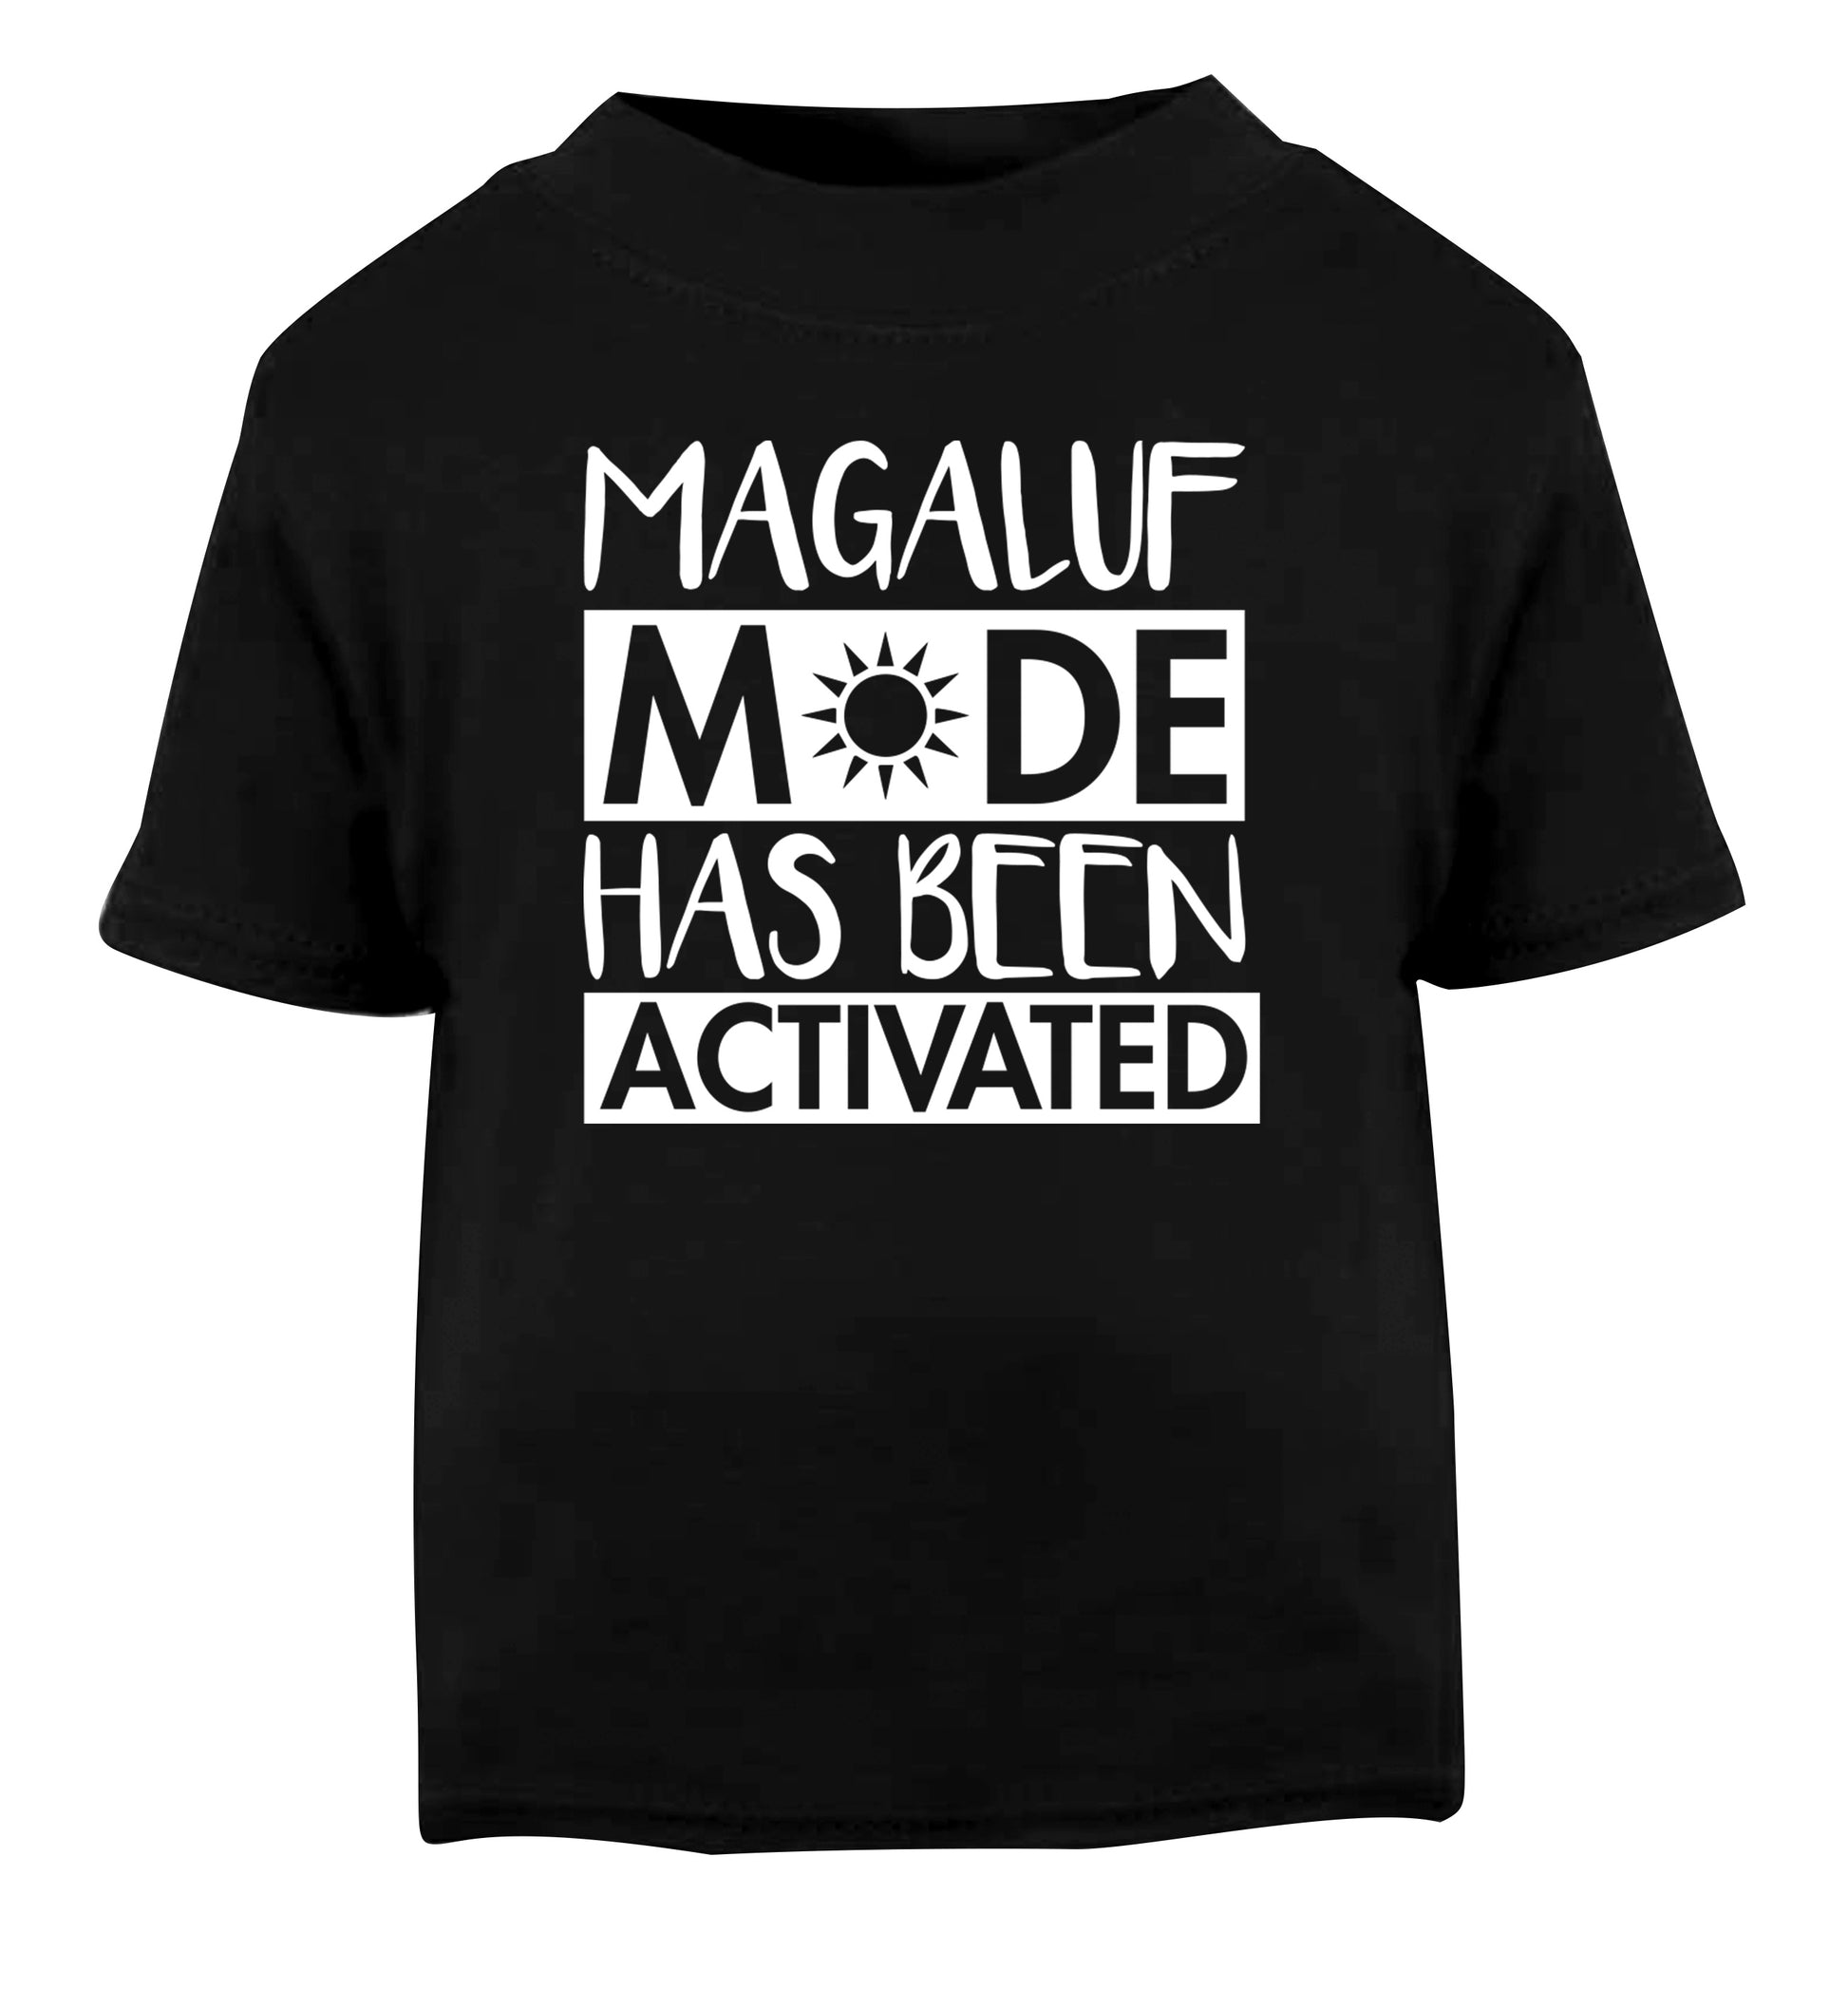 Magaluf mode has been activated Black Baby Toddler Tshirt 2 years